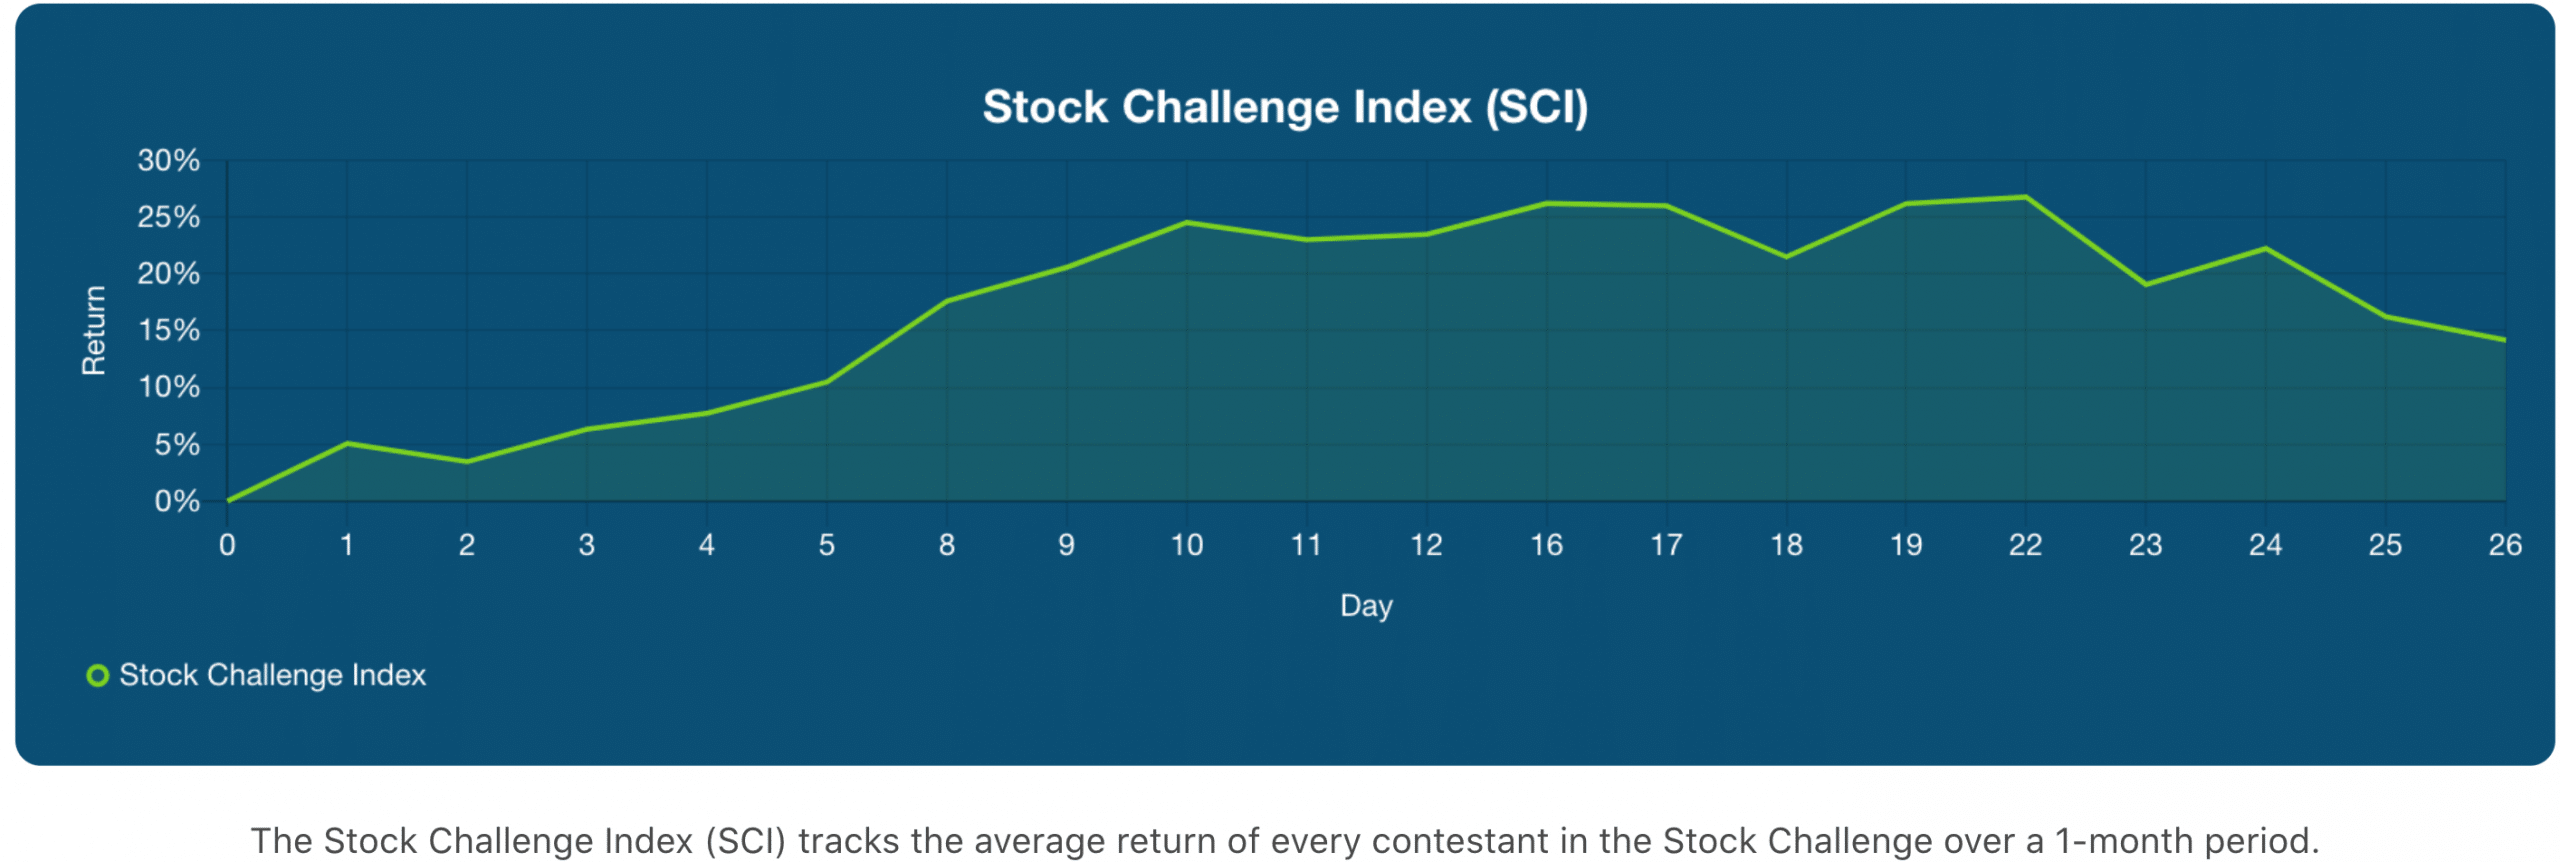 stock challenge index (SCI) as of february 26, 2021